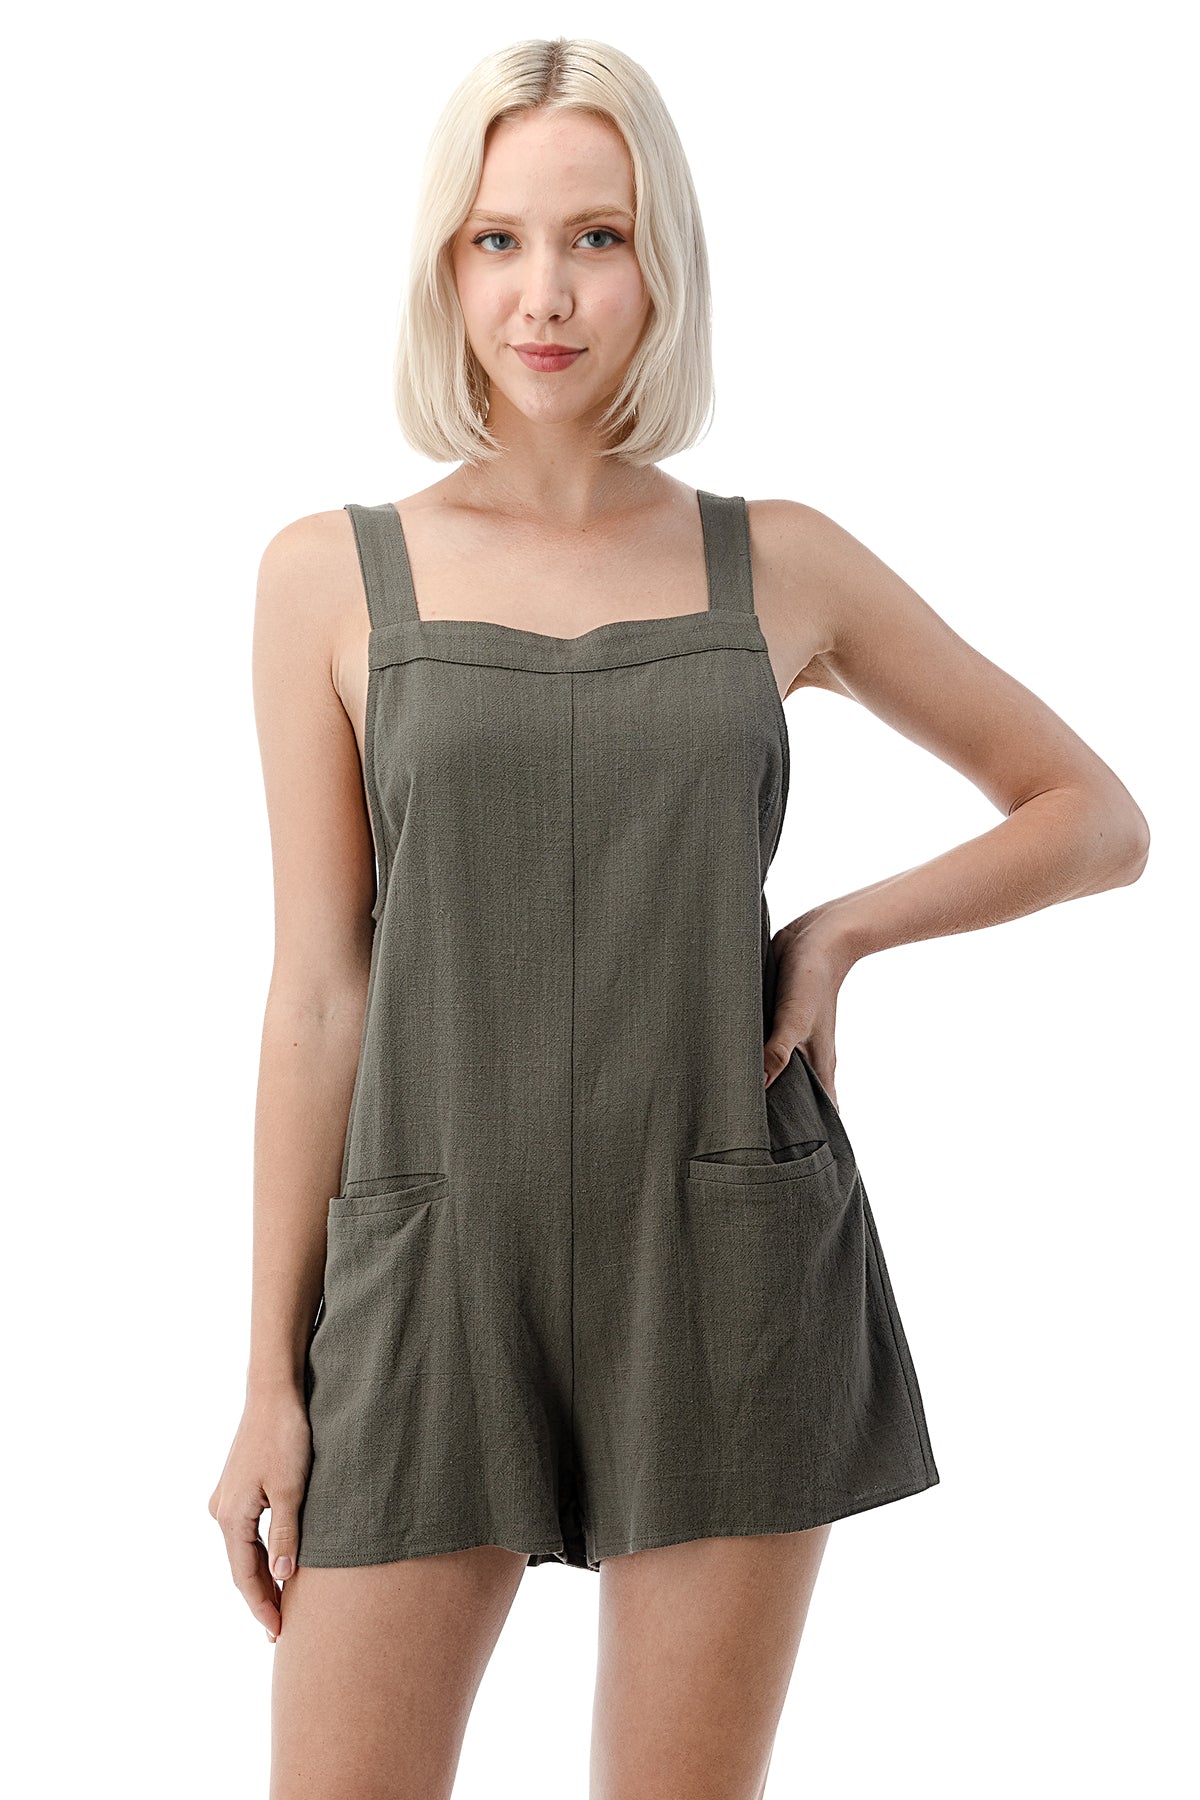 EDGY Land Girl's and Women's Casual Low Armhole Pockets Front Square Neck Tank Romper